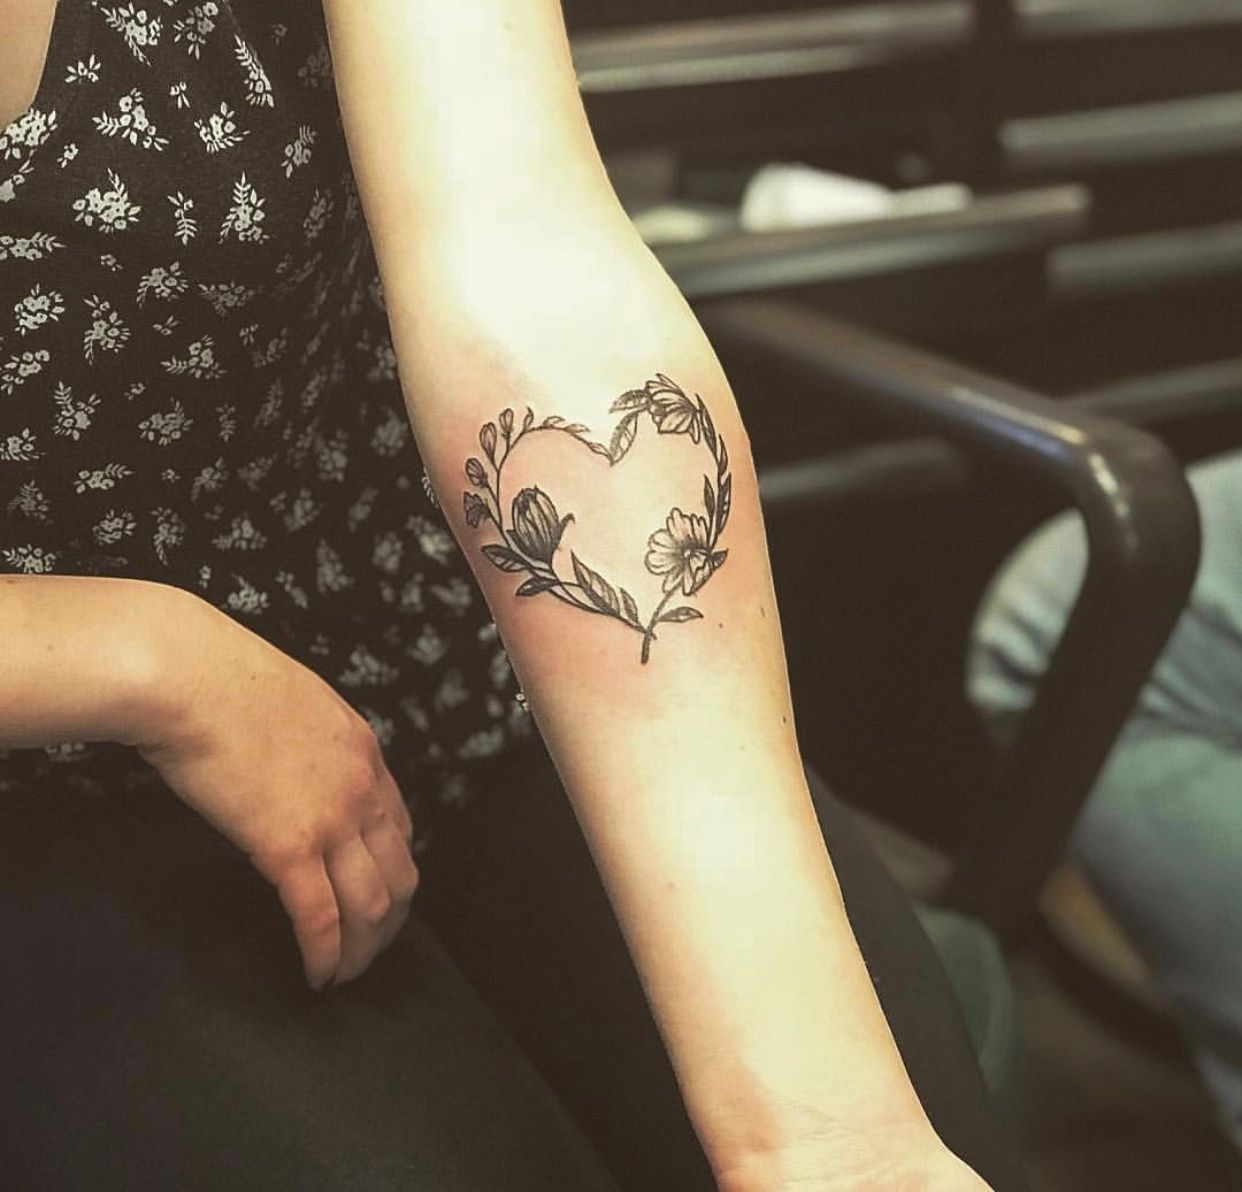 Diamond Tattoo in Hurst Offers Special Tattoos to Protest Abortion Ruling   Dallas Observer